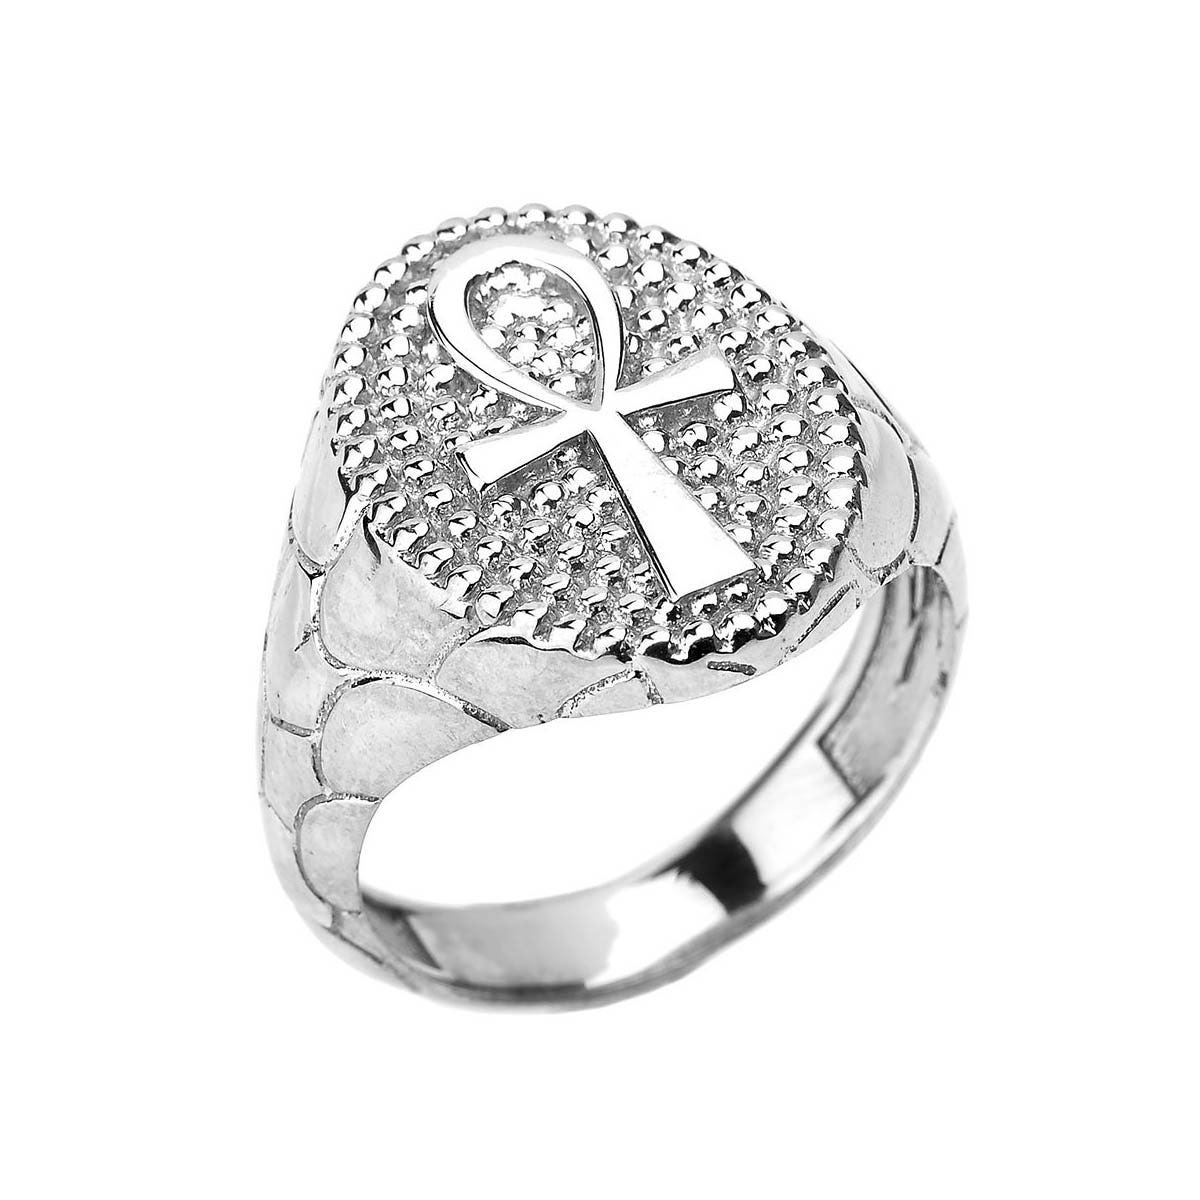 Gold Boutique - Man Ring in Silver GOOFASH